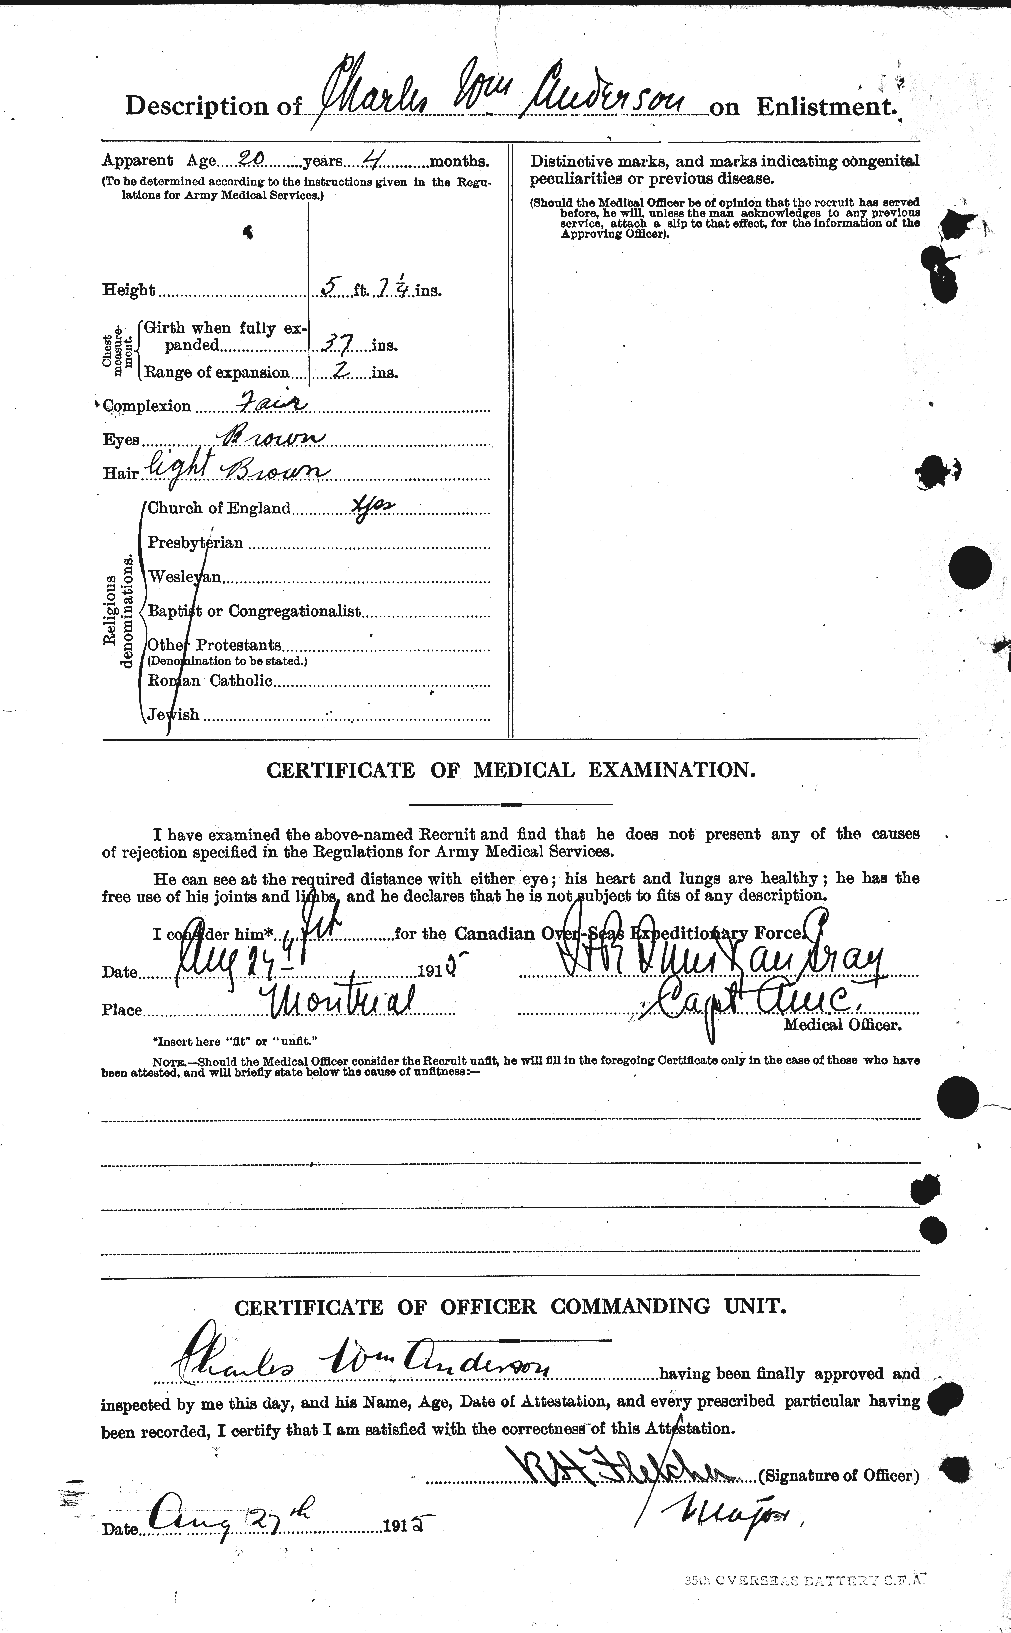 Personnel Records of the First World War - CEF 209220b